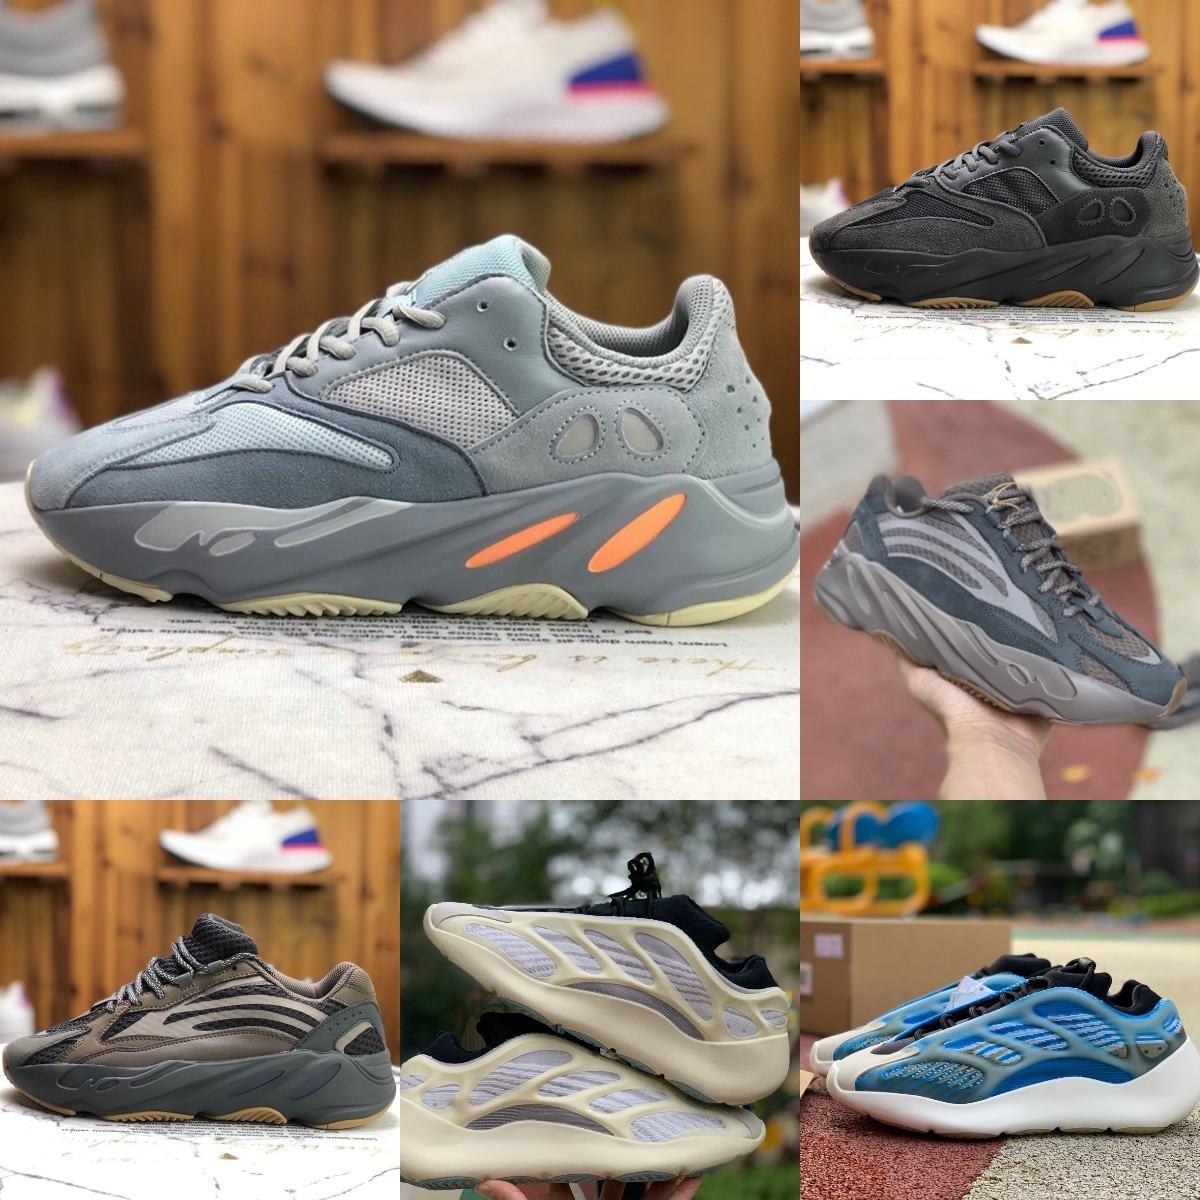 

High Quality Enflame Amber 700 V2 Men Women Sports Shoes Inertia Runner Sea Bright Blue 700S Geode Alvah Azael Static Magnet Wave Solid Grey Tephra Trainer Sneakers S1, Please contact us